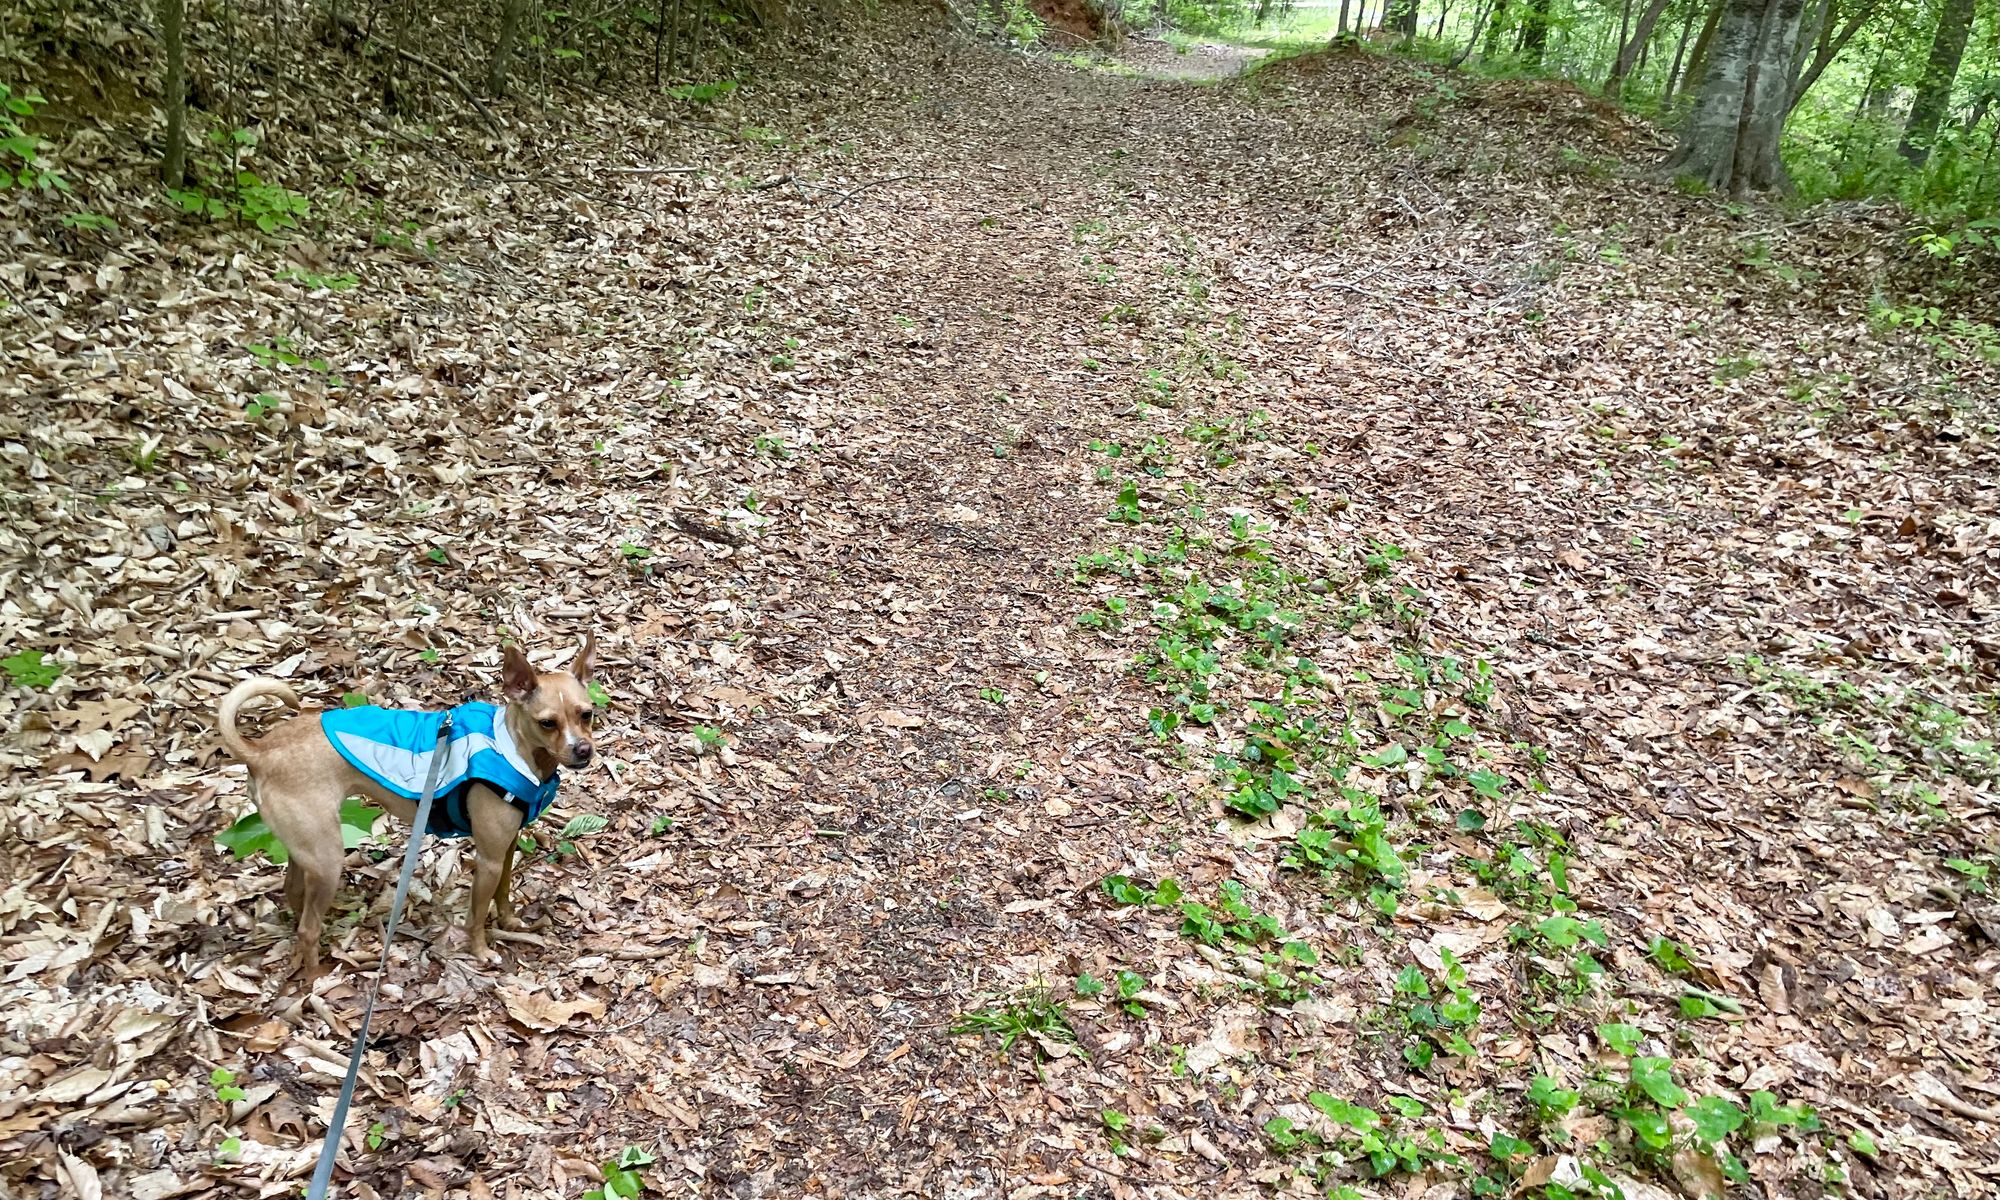 Jean stands on the wooded hiking trail (mostly leaves for ground cover) in her blue rain jacket.